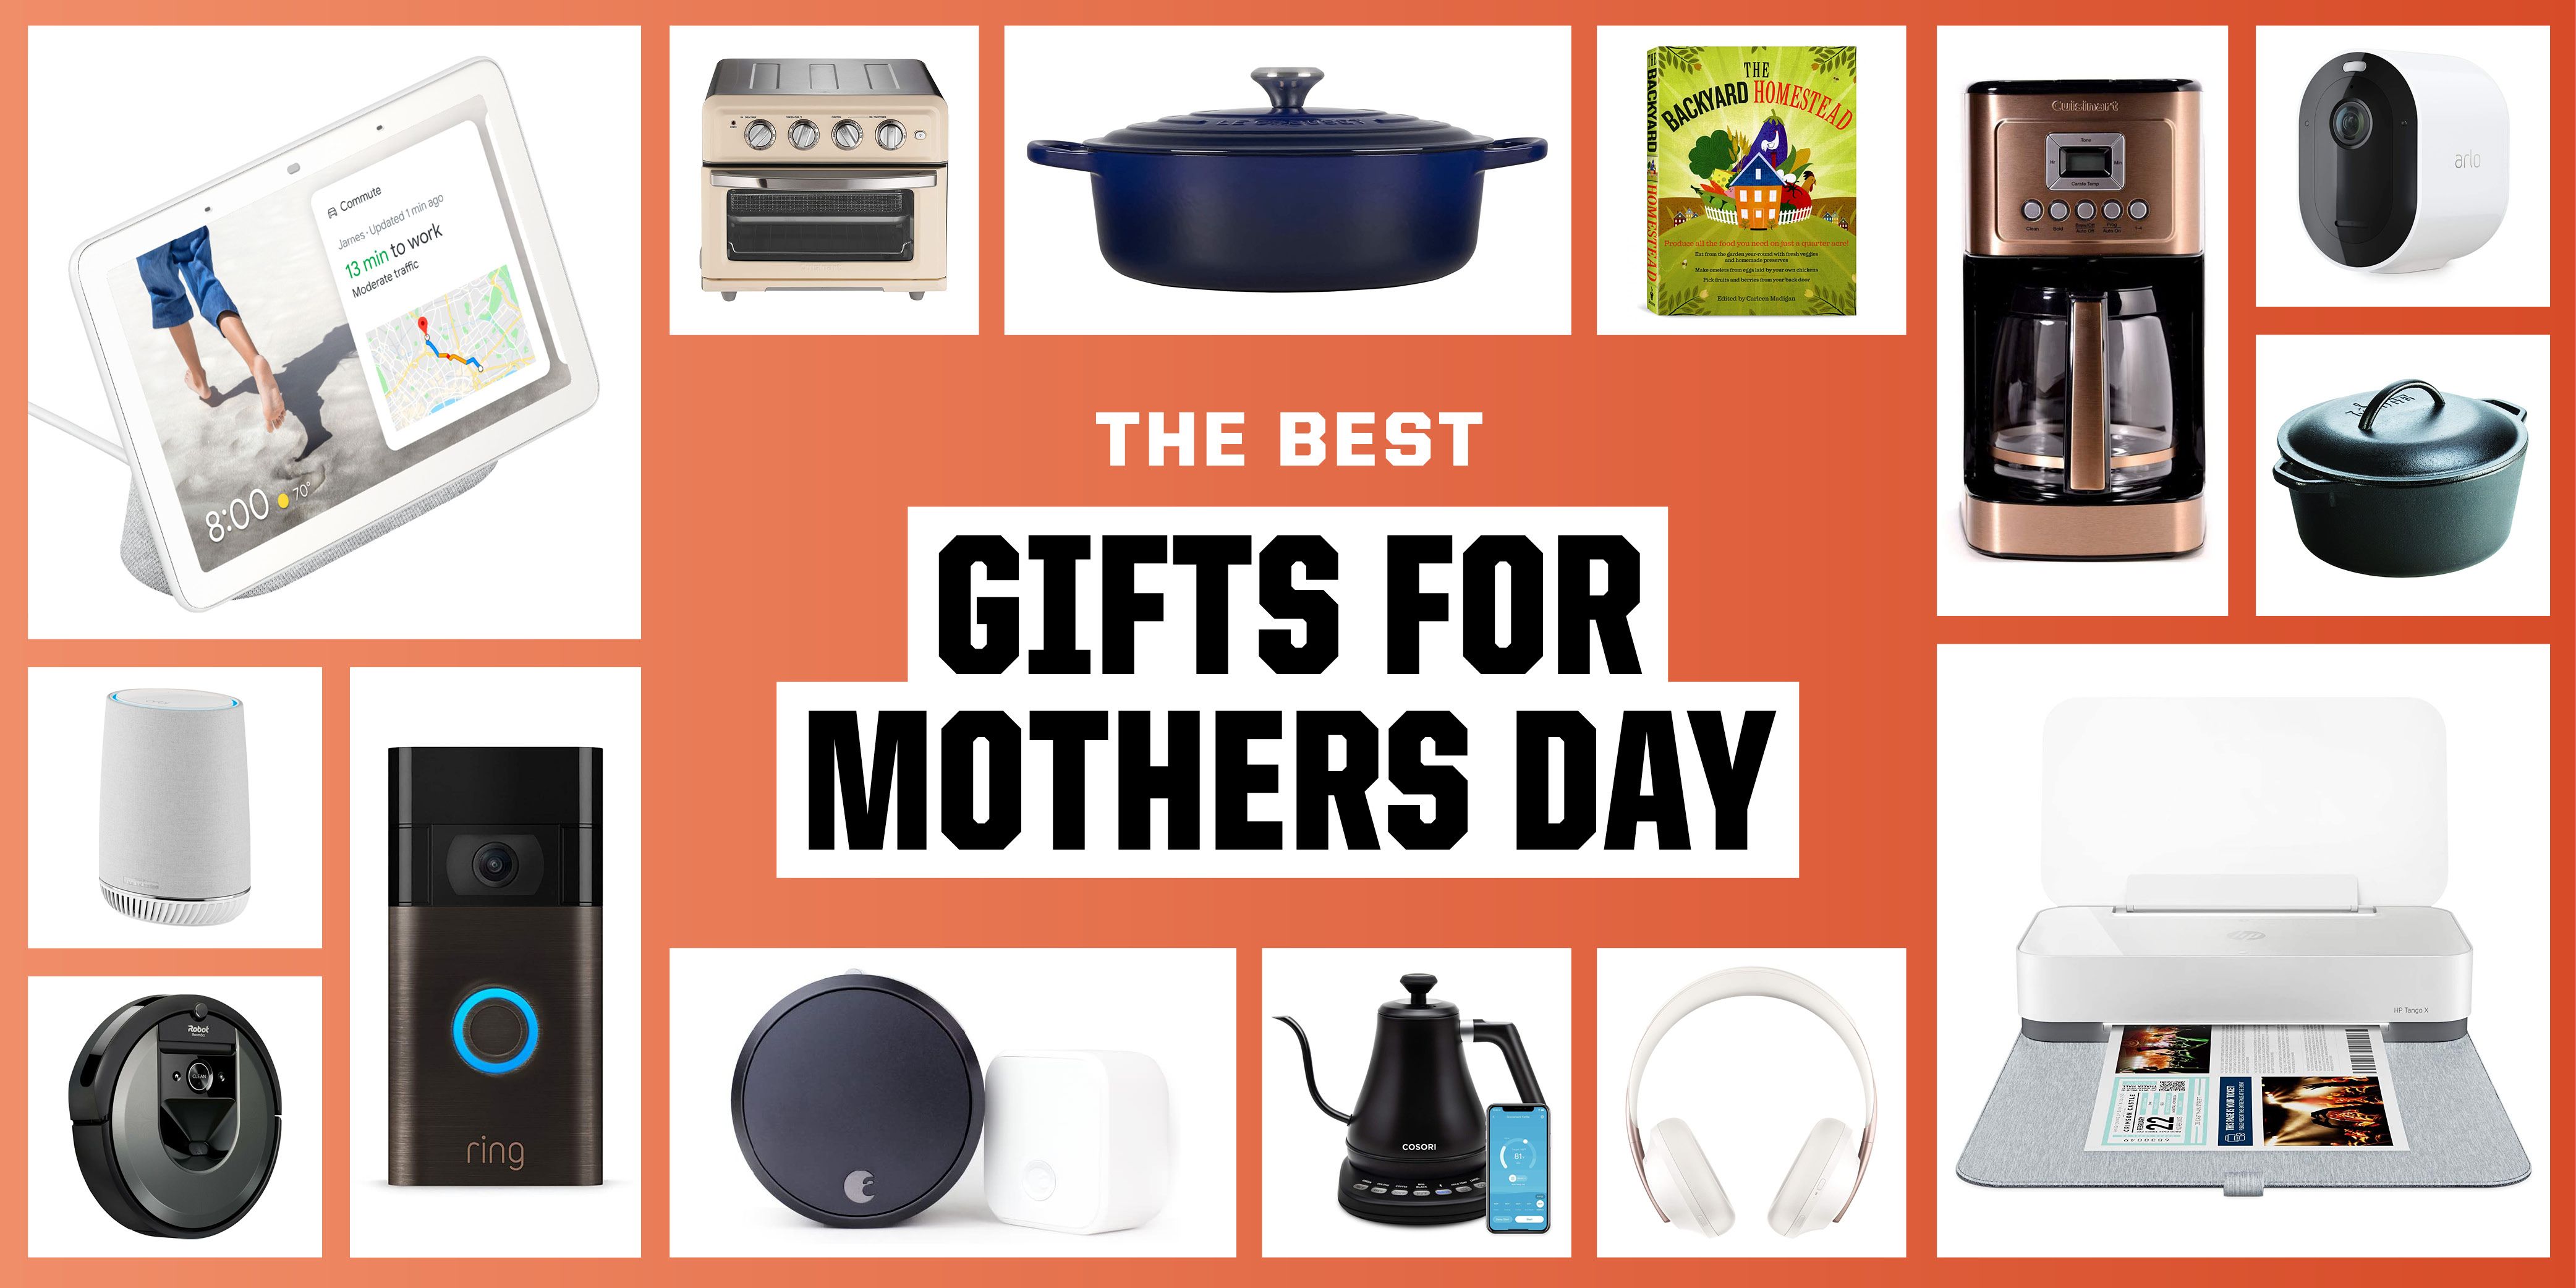 Mother's Day Gift Guide - Every Last Bite